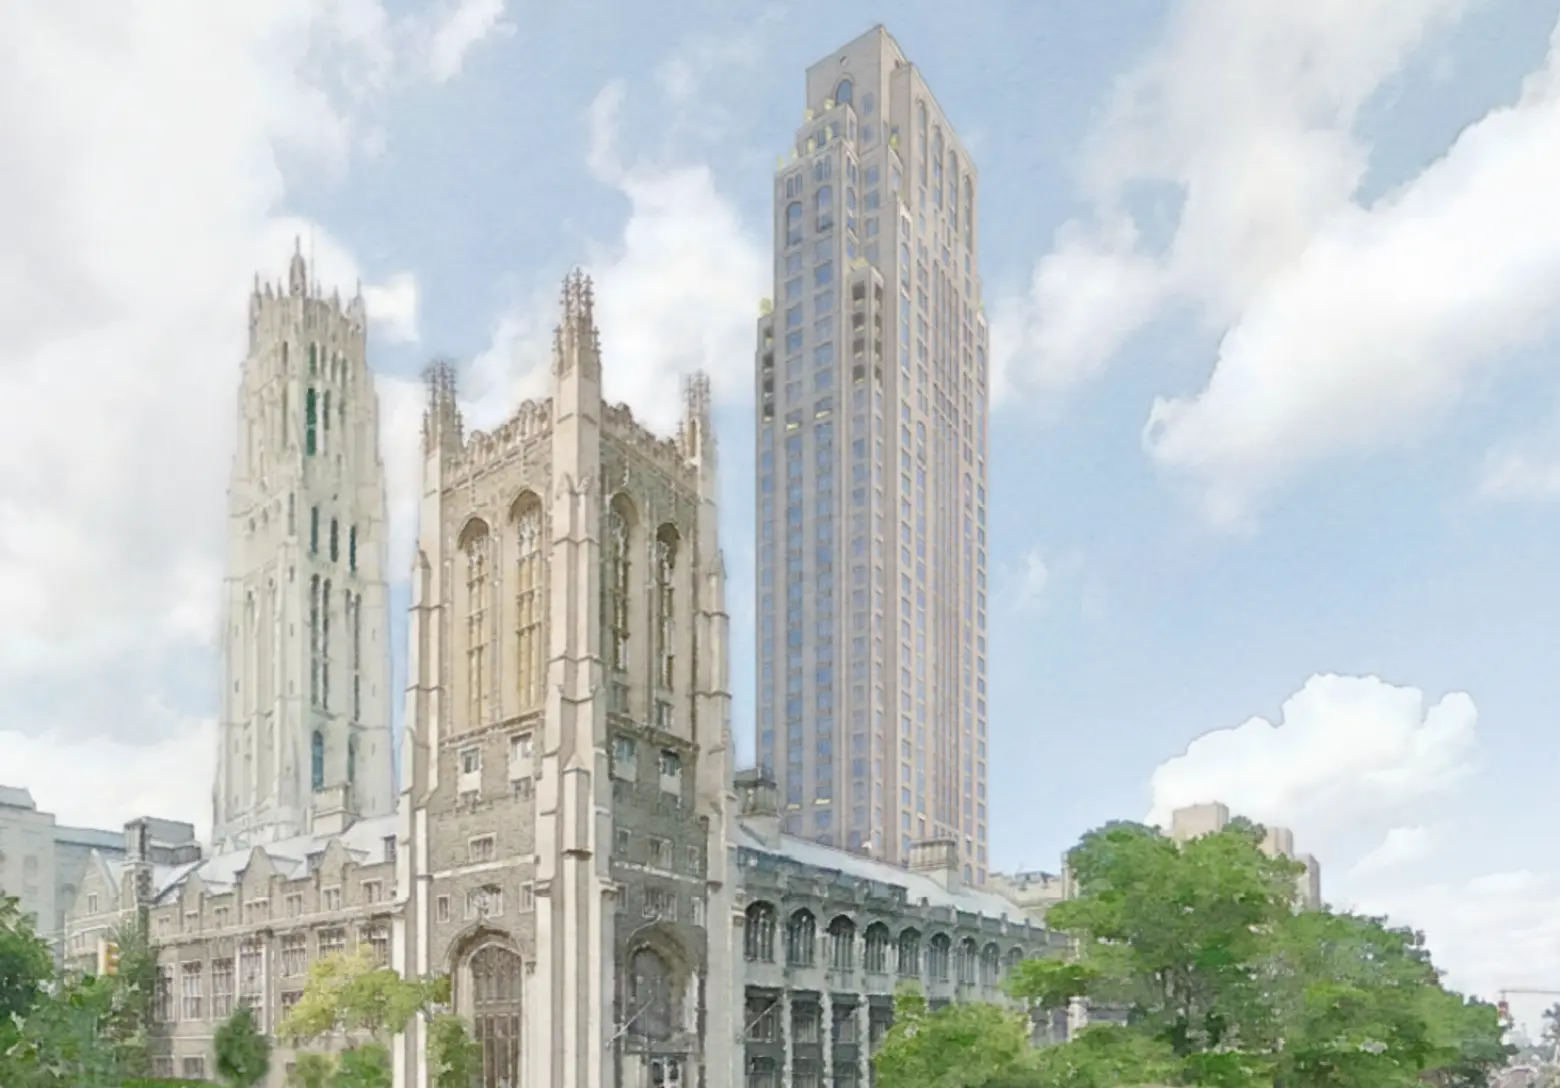 42-story condo will rise at Morningside Heights seminary; NYC traffic deaths hit lowest in a century